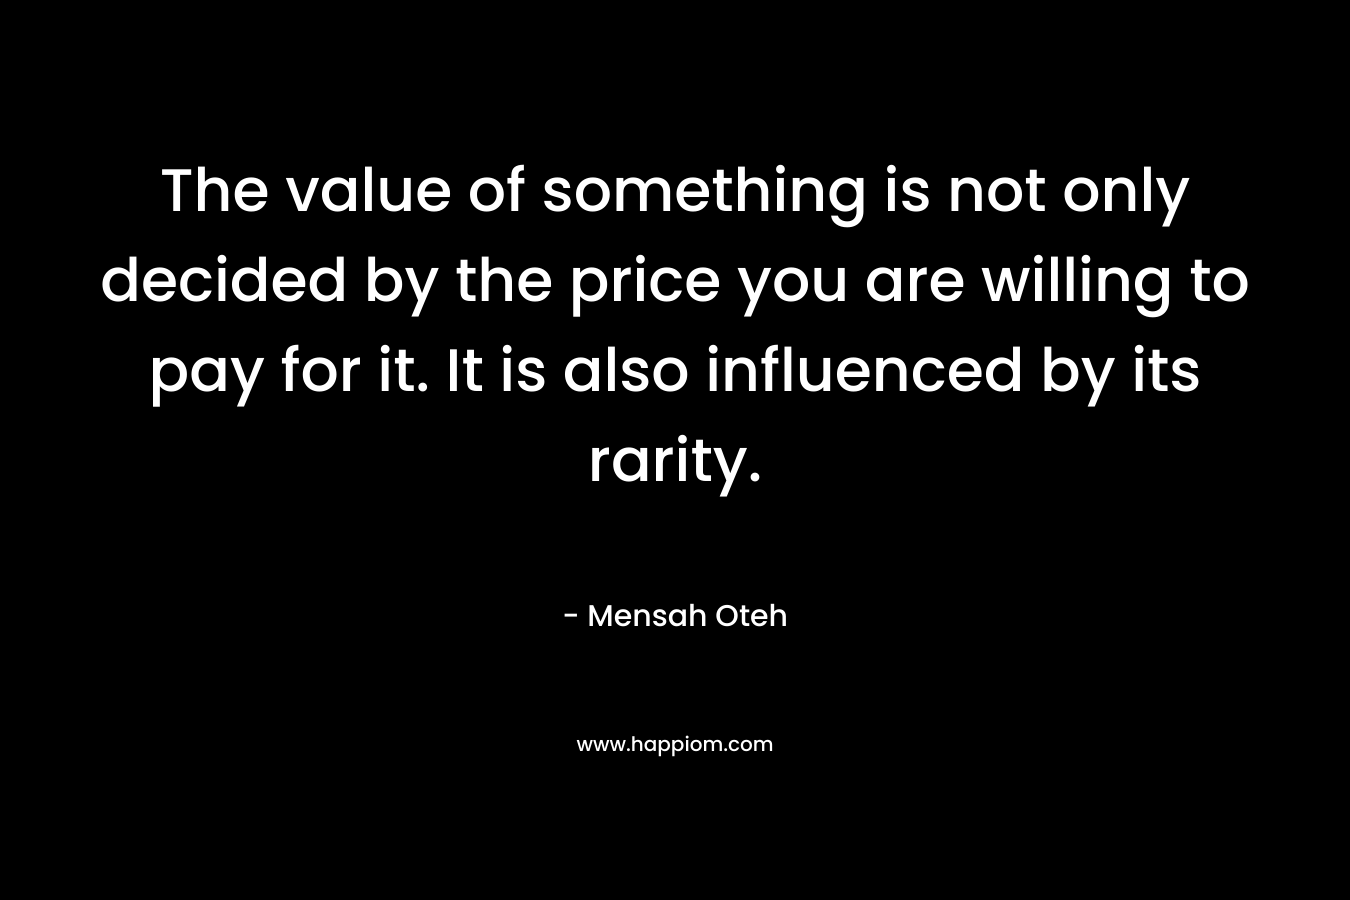 The value of something is not only decided by the price you are willing to pay for it. It is also influenced by its rarity.